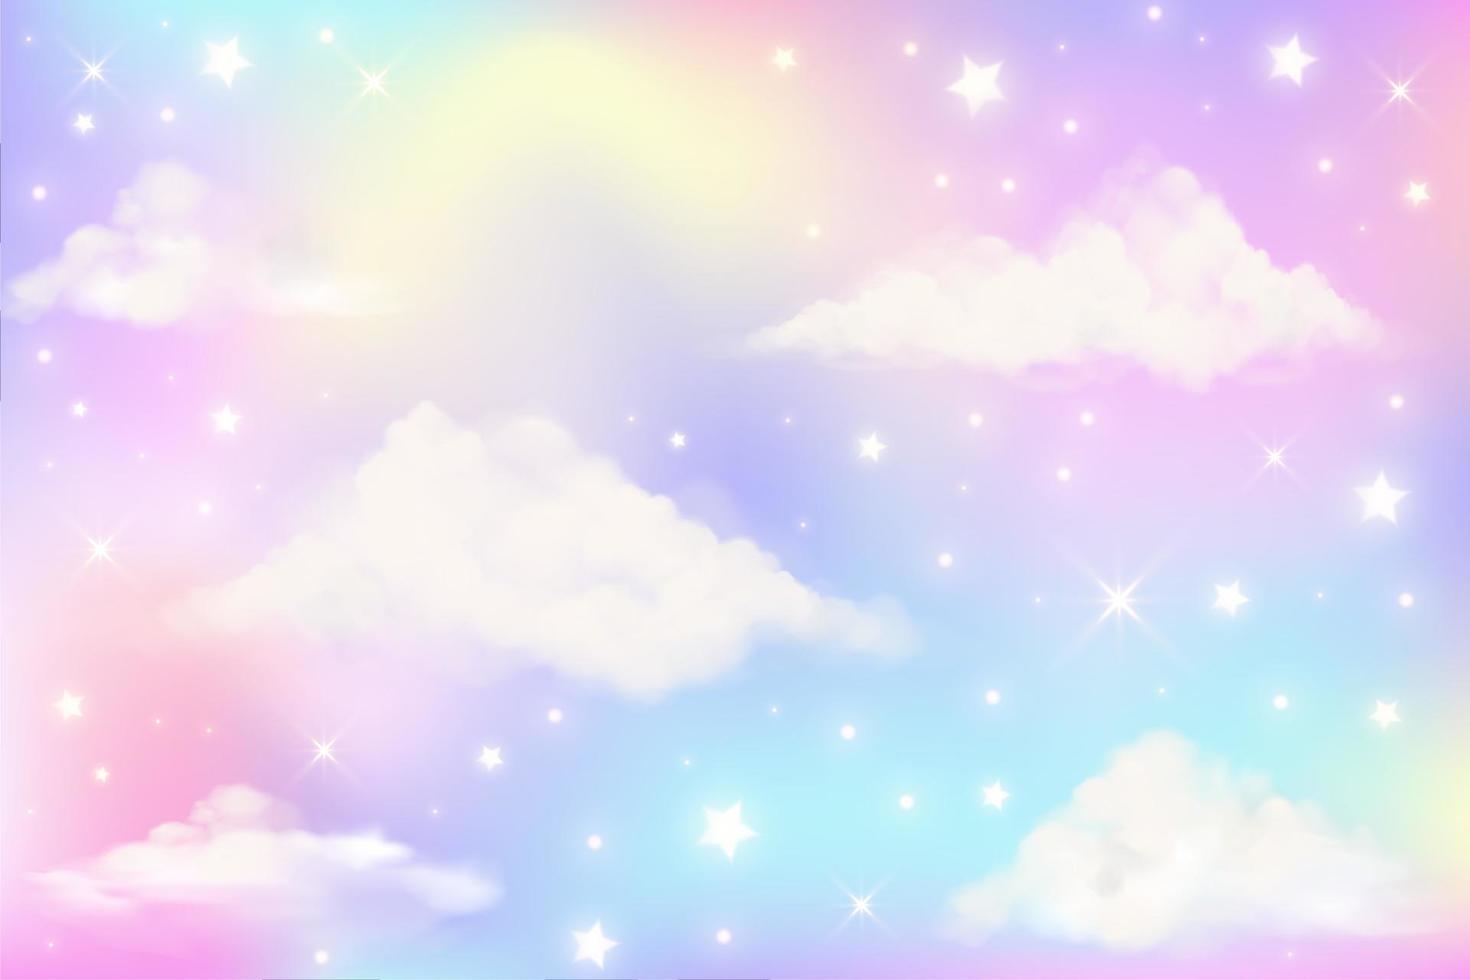 A sky with clouds and stars - Pastel rainbow